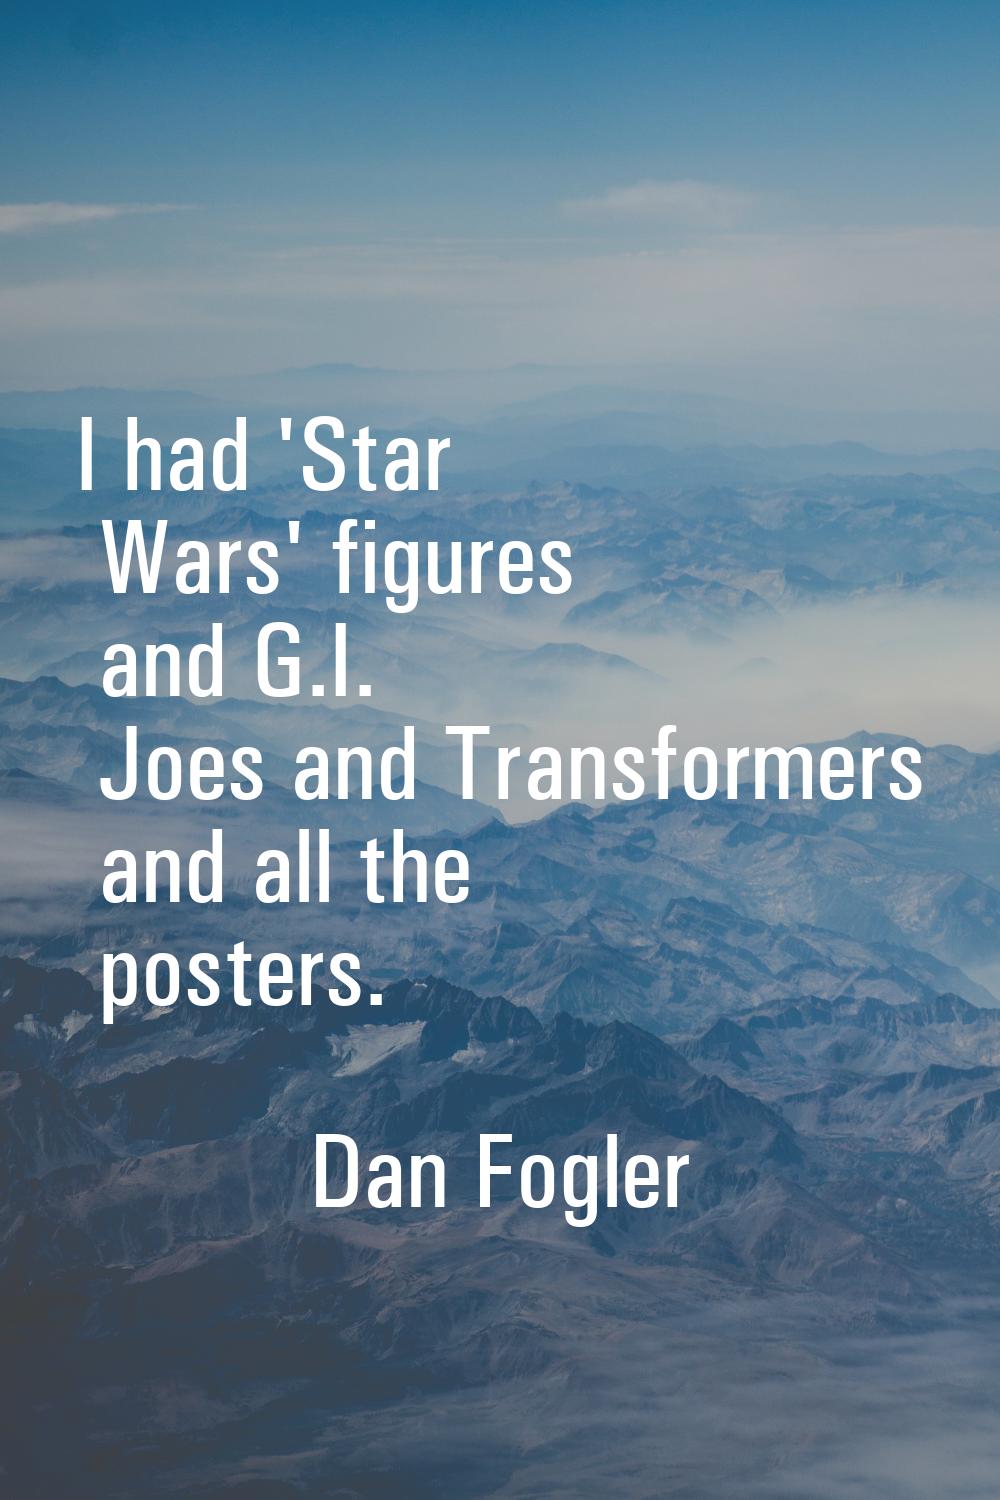 I had 'Star Wars' figures and G.I. Joes and Transformers and all the posters.